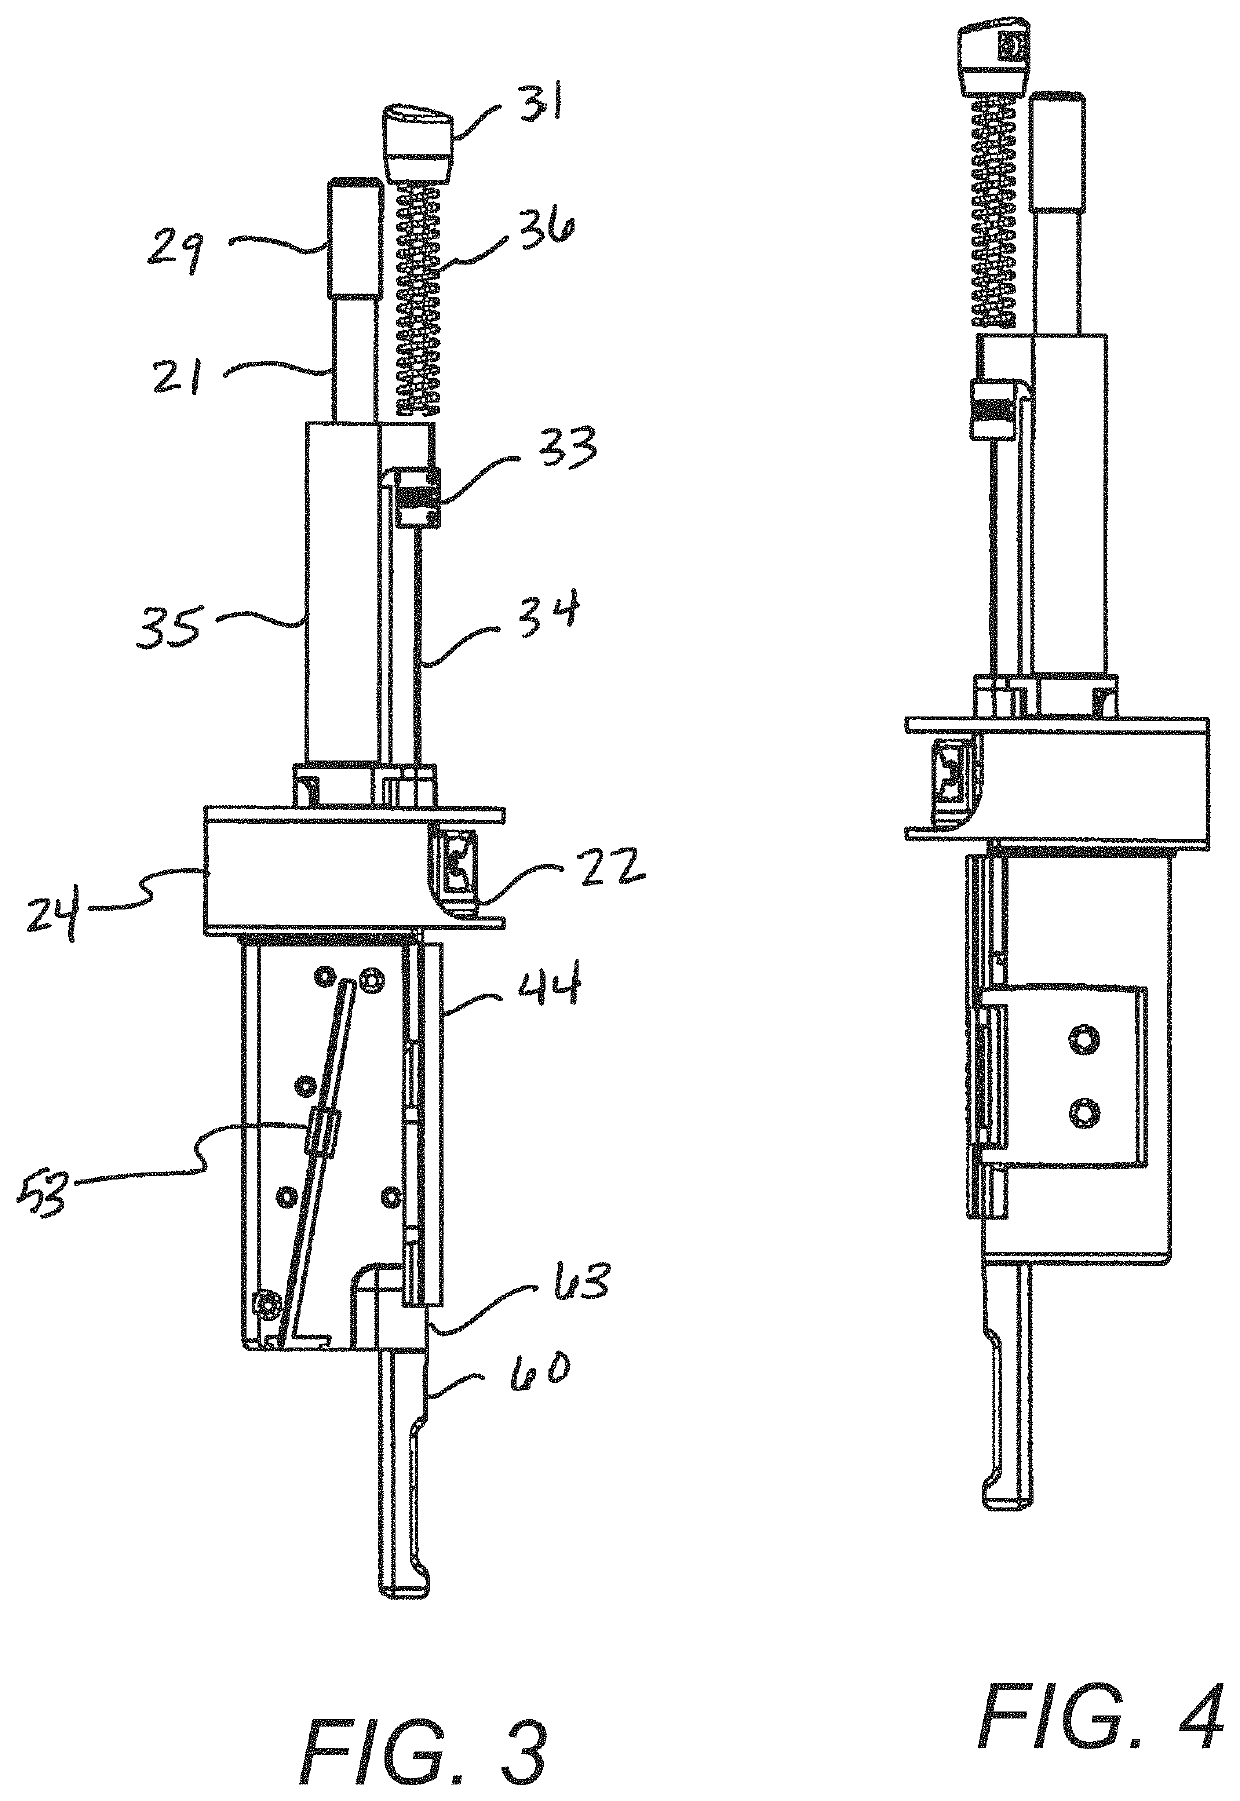 Cutting device for brachytherapy seed implantation sleeves